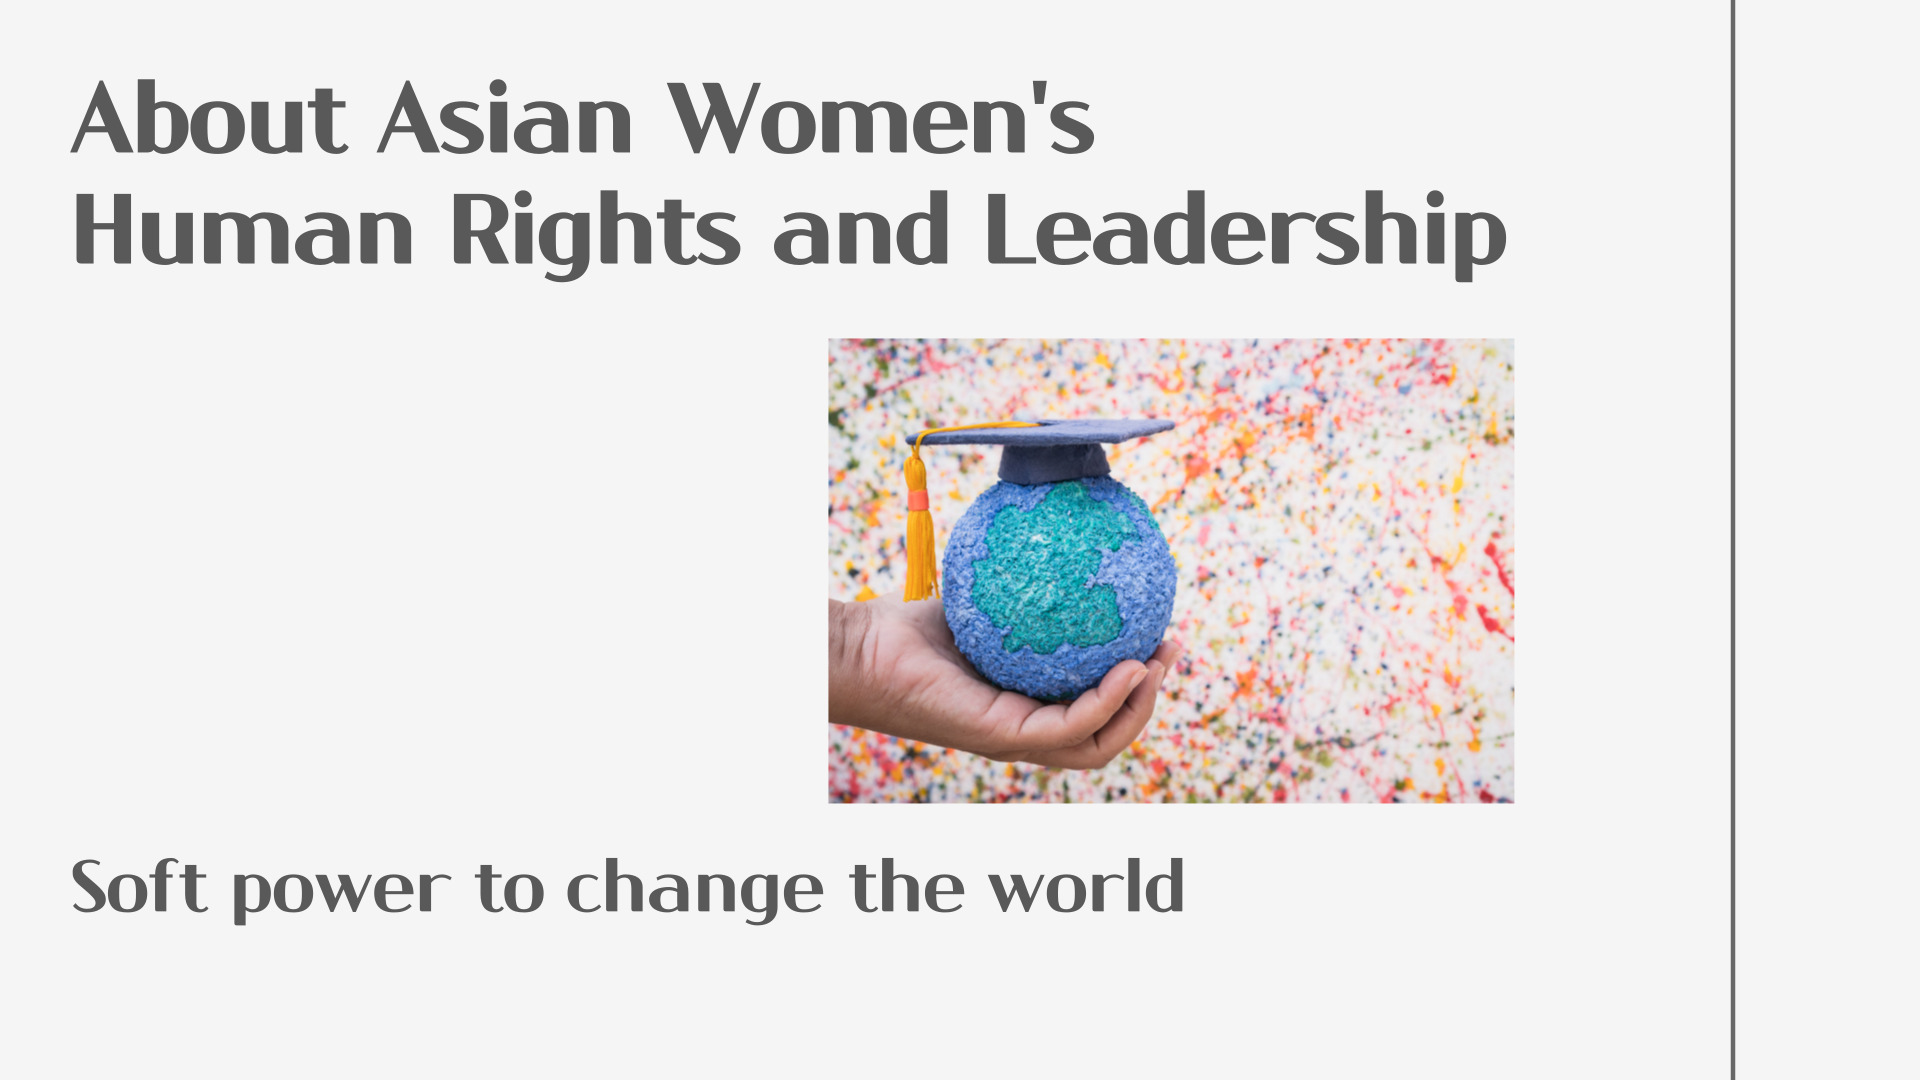 About Asian Women's Human Rights and Leadership